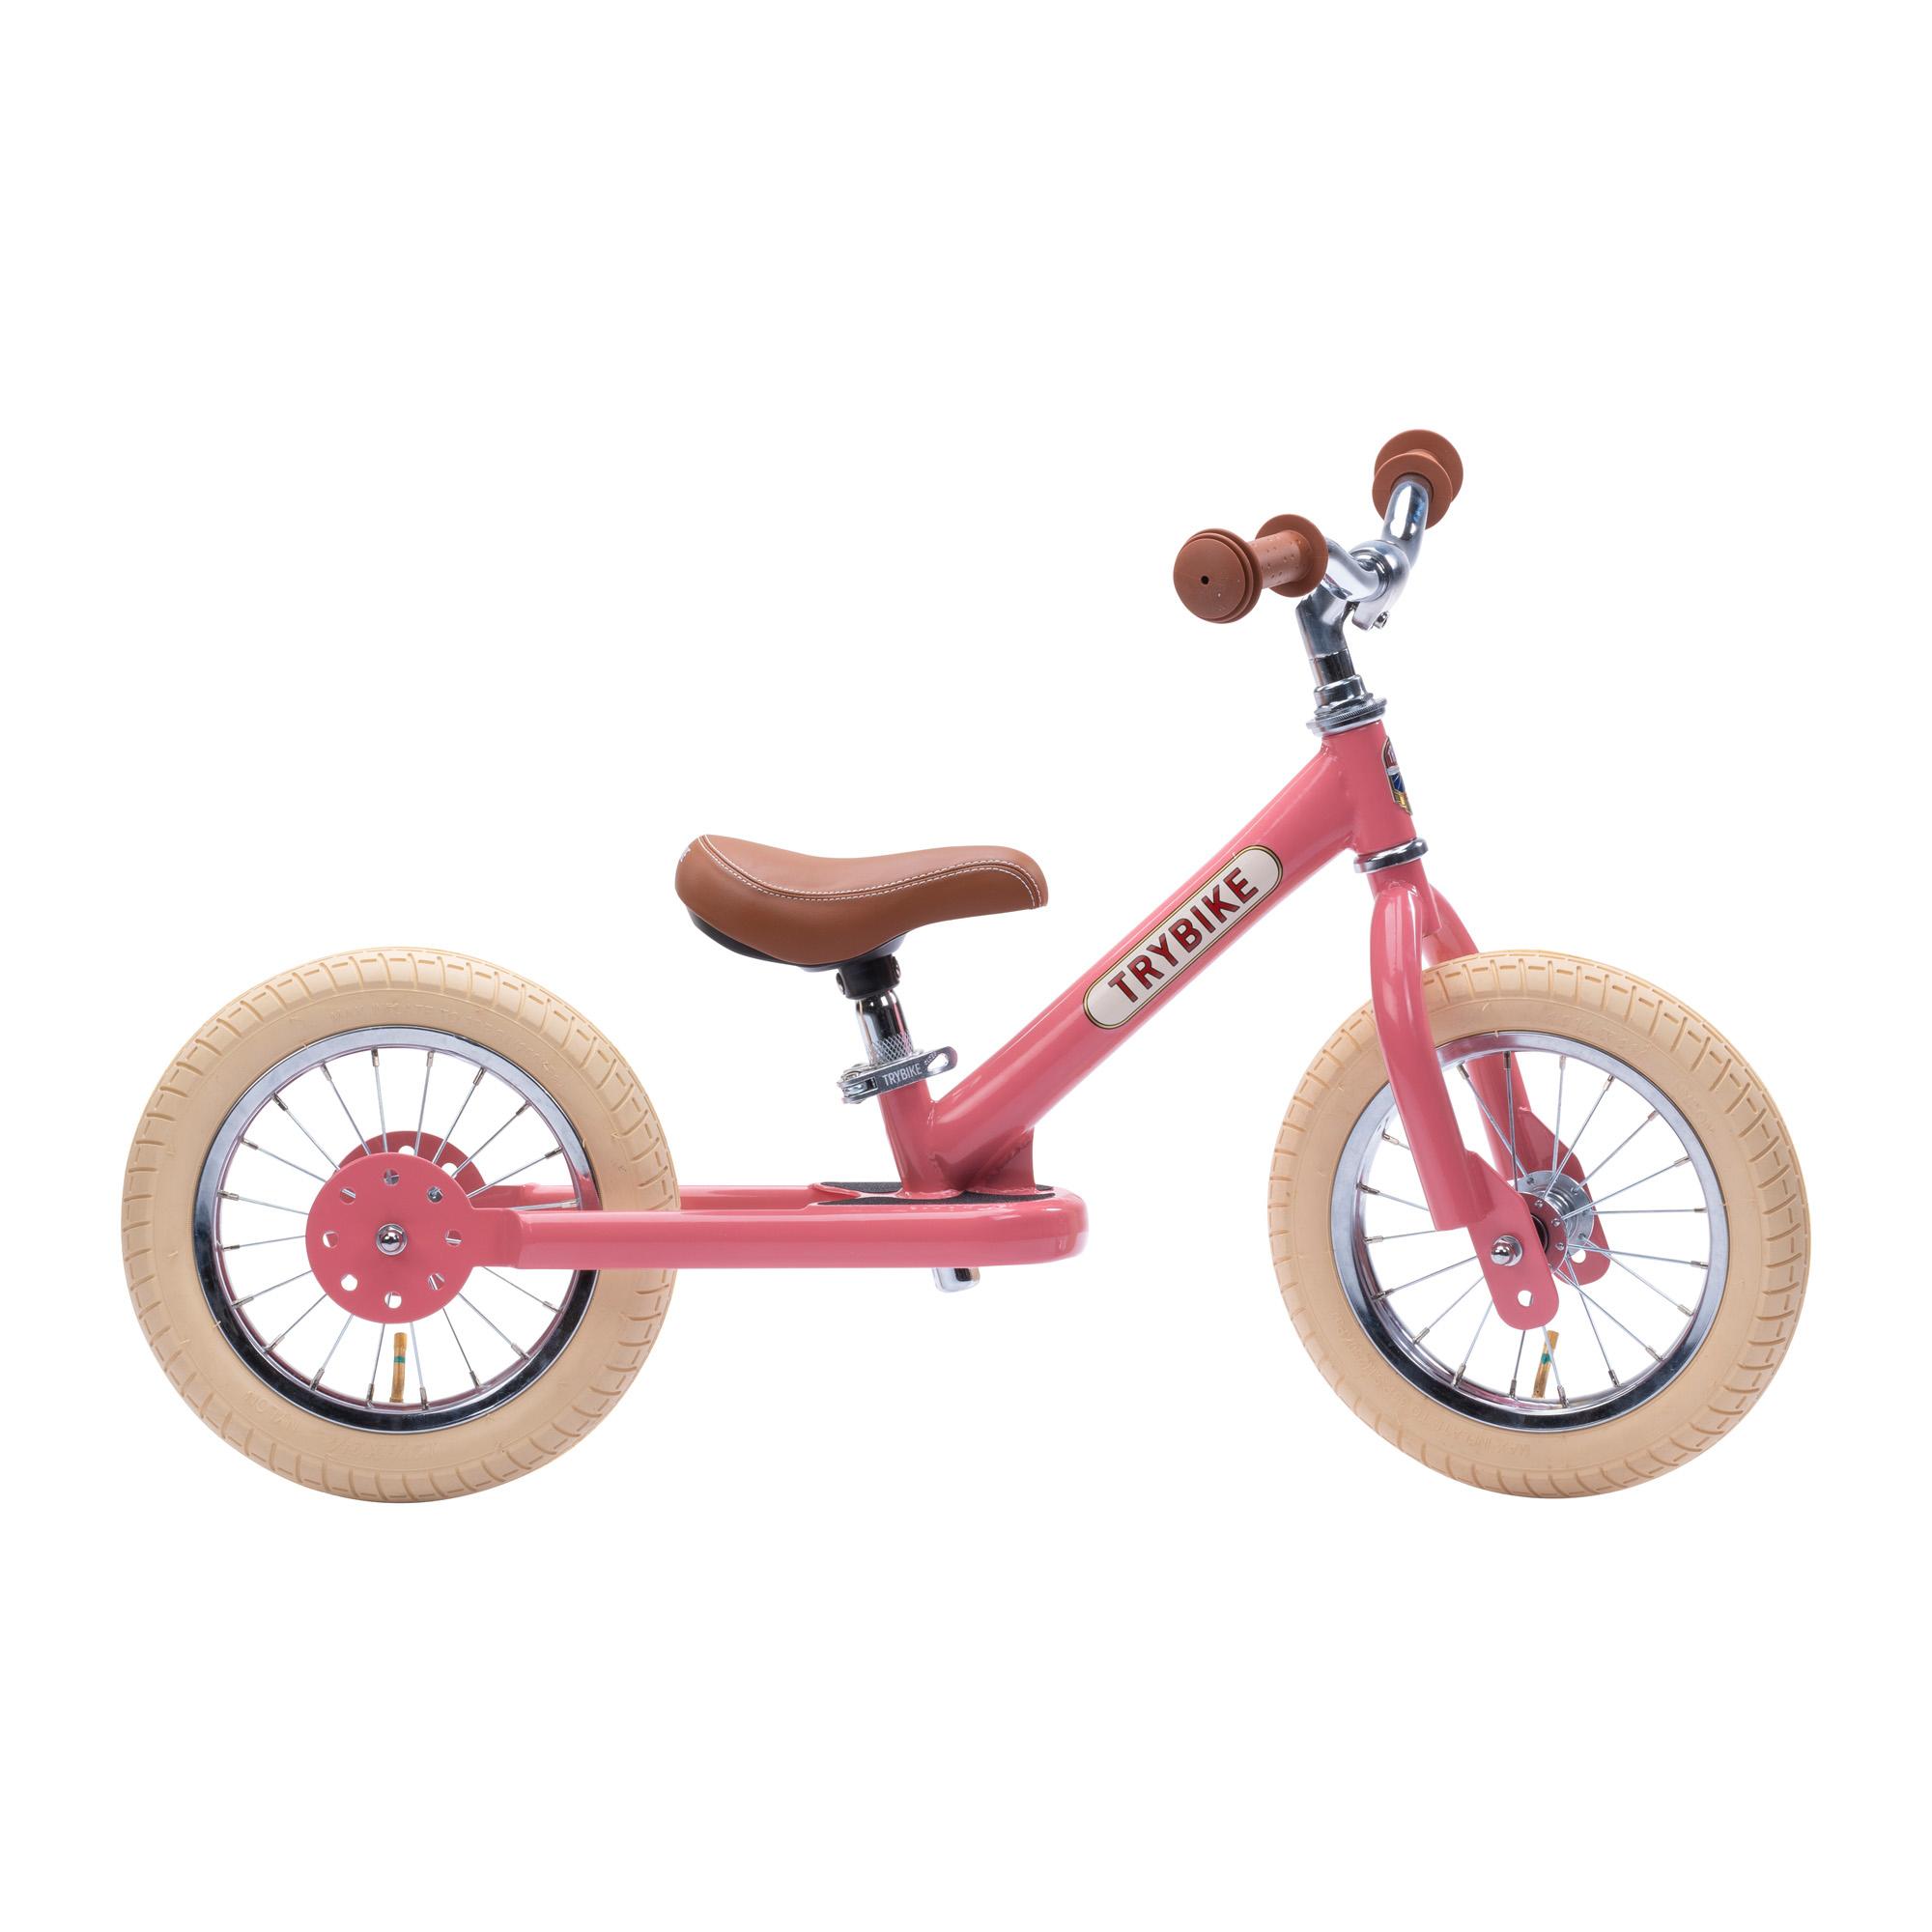 Side view of pink Trybike on white background.